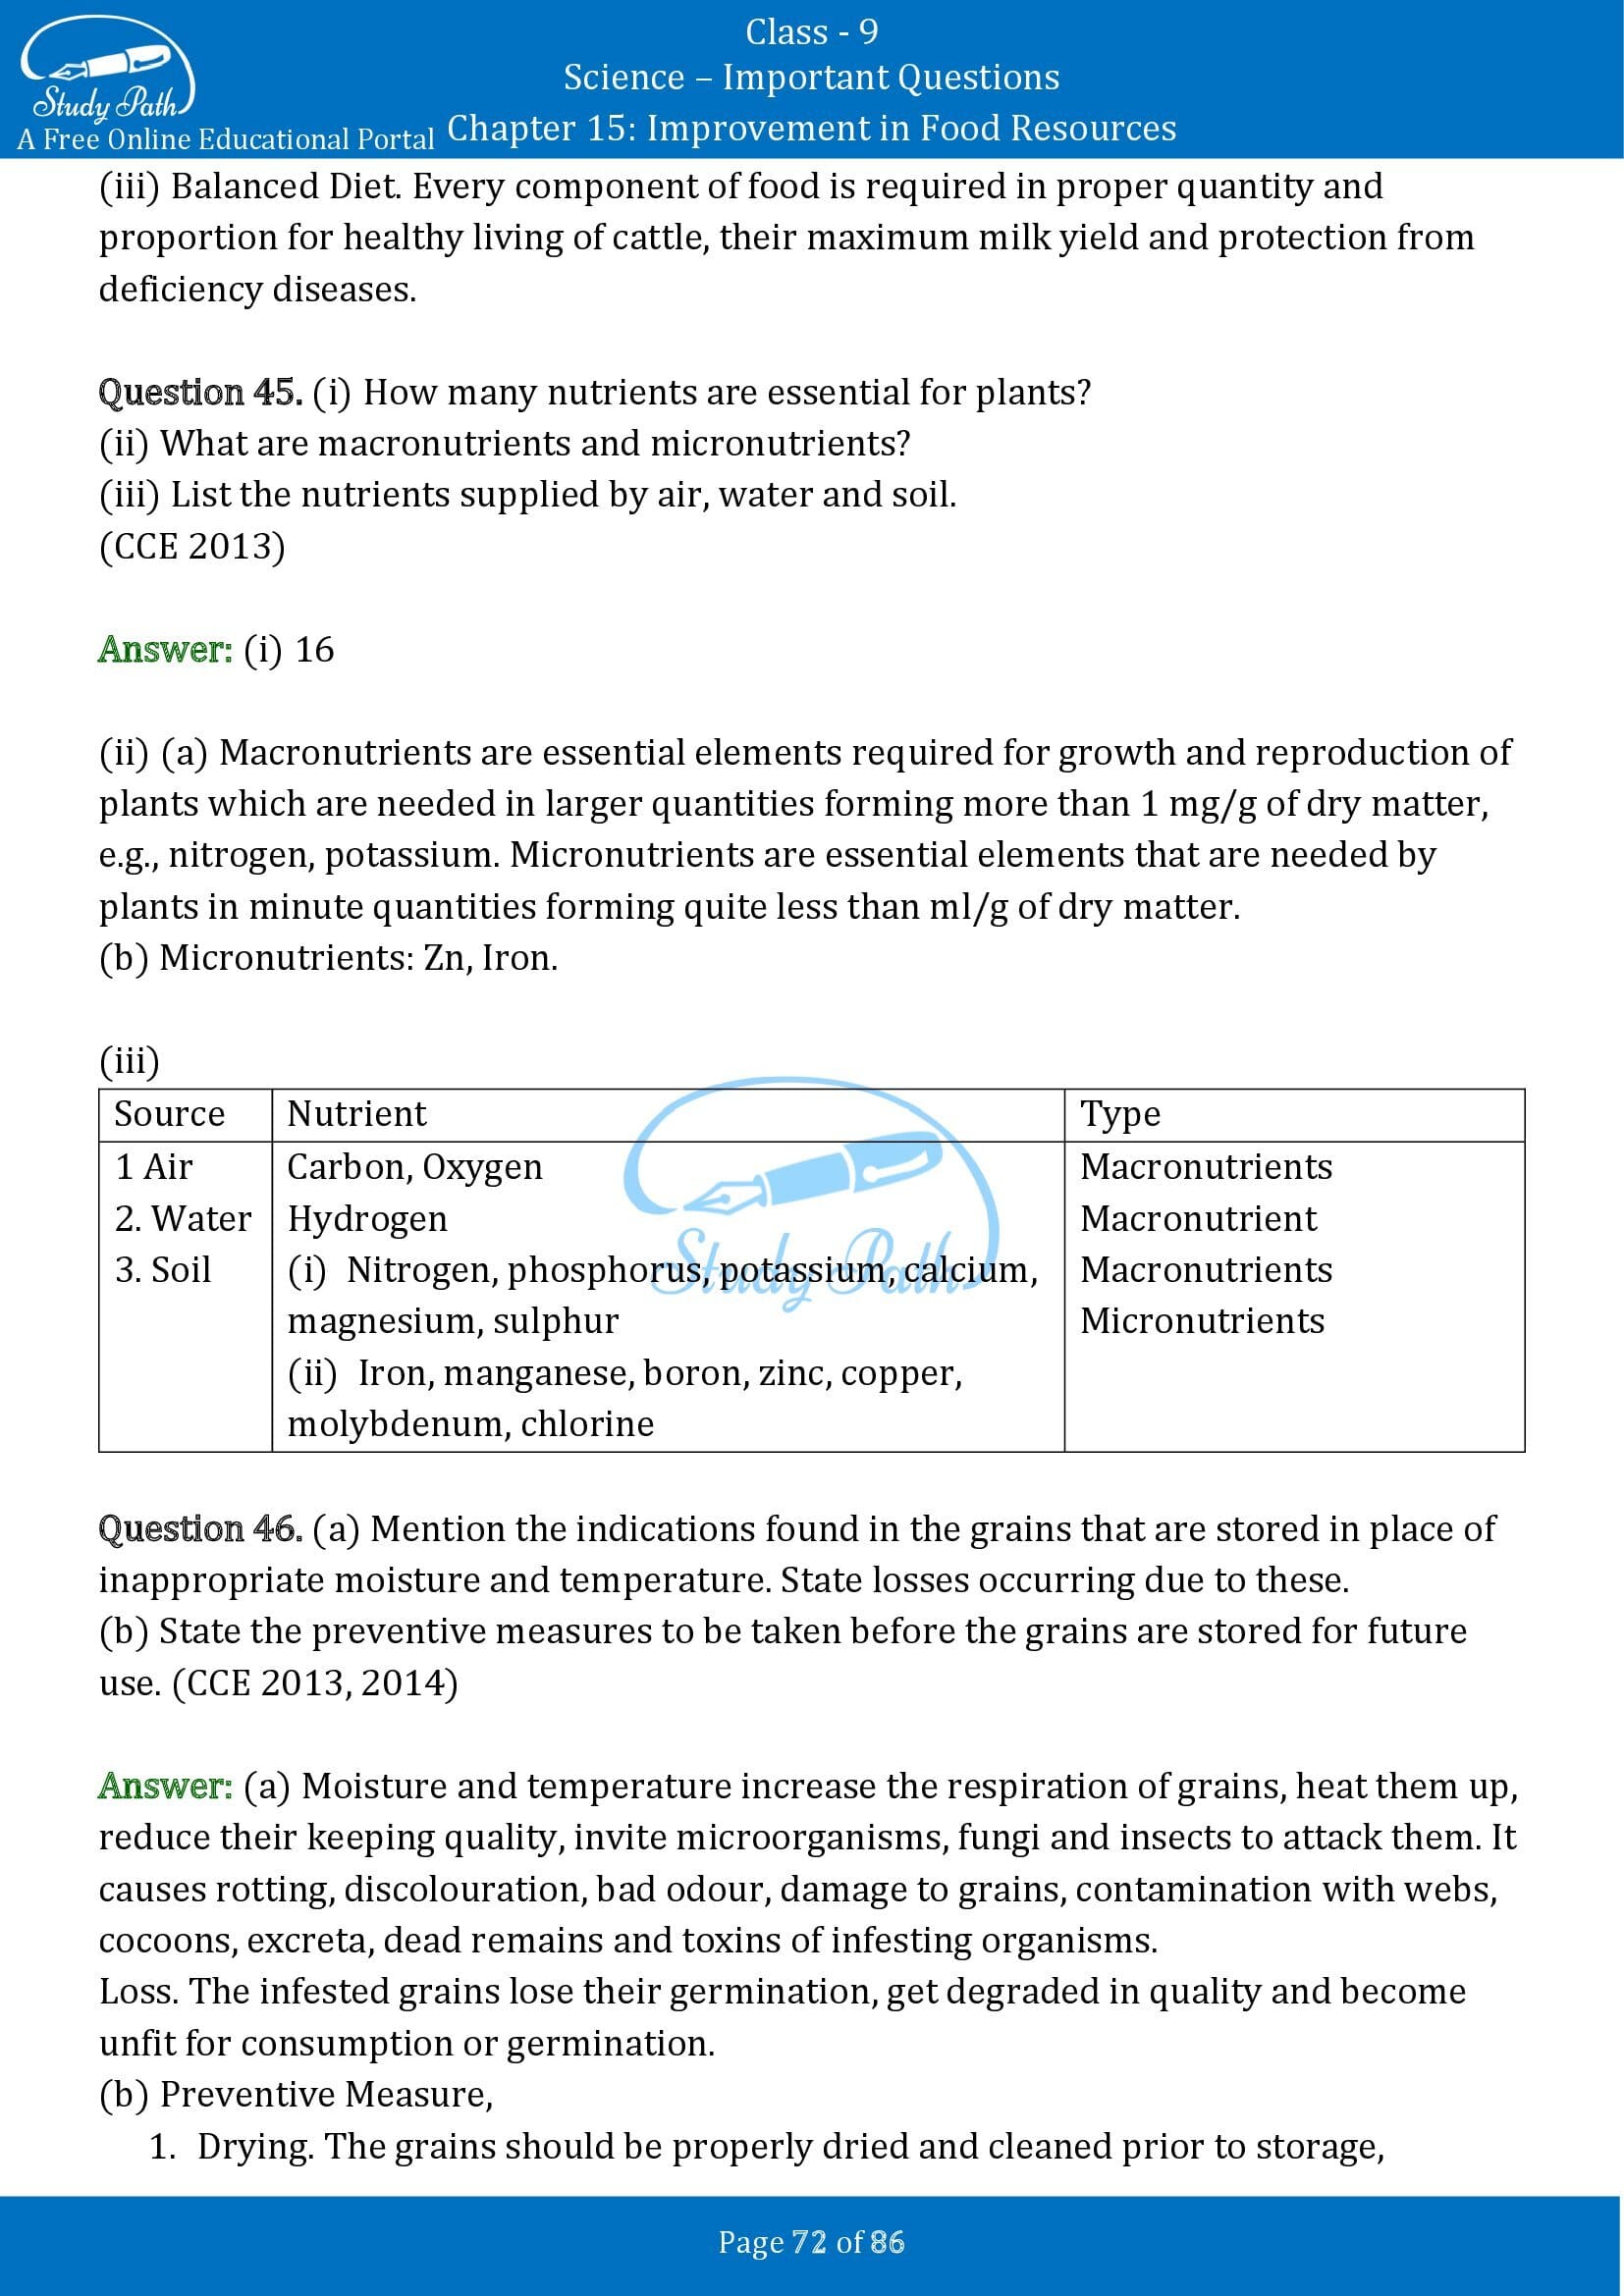 Important Questions for Class 9 Science Chapter 15 Improvement in Food Resources 00072